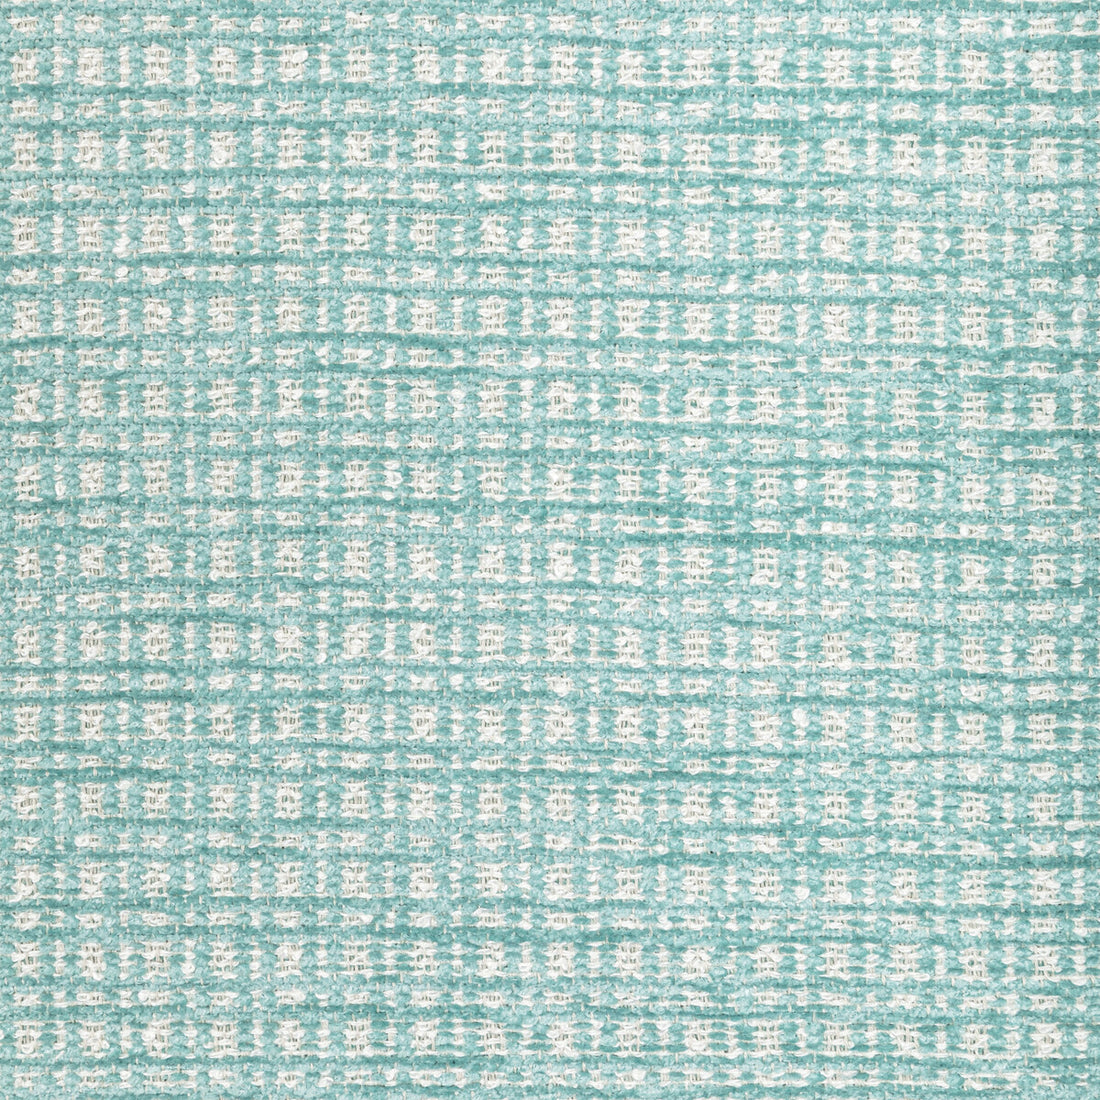 Landiers Texture fabric in aqua color - pattern 8022123.13.0 - by Brunschwig &amp; Fils in the Chambery Textures III collection